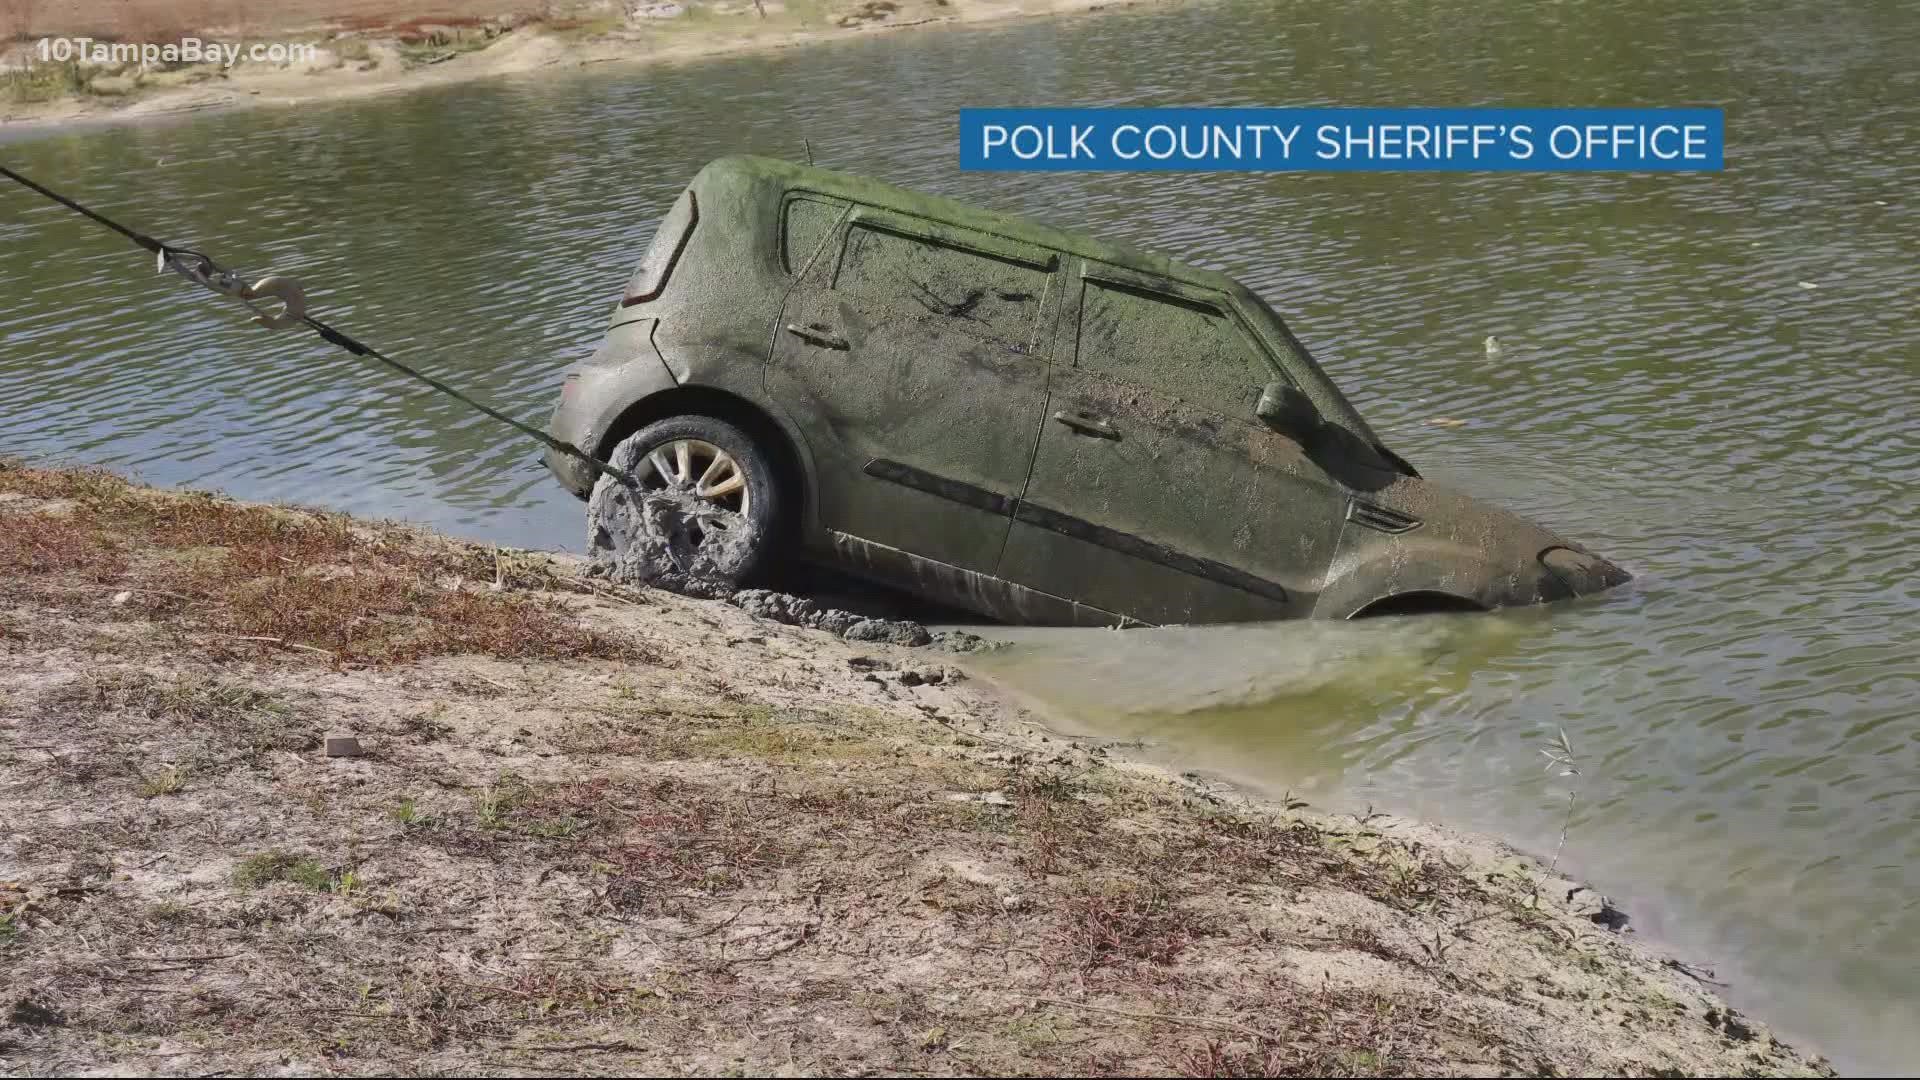 The Polk County Sheriff's Office did not identify the body found but said the car is associated with Margaret "Jan" Smith, who's been missing since April 2021.